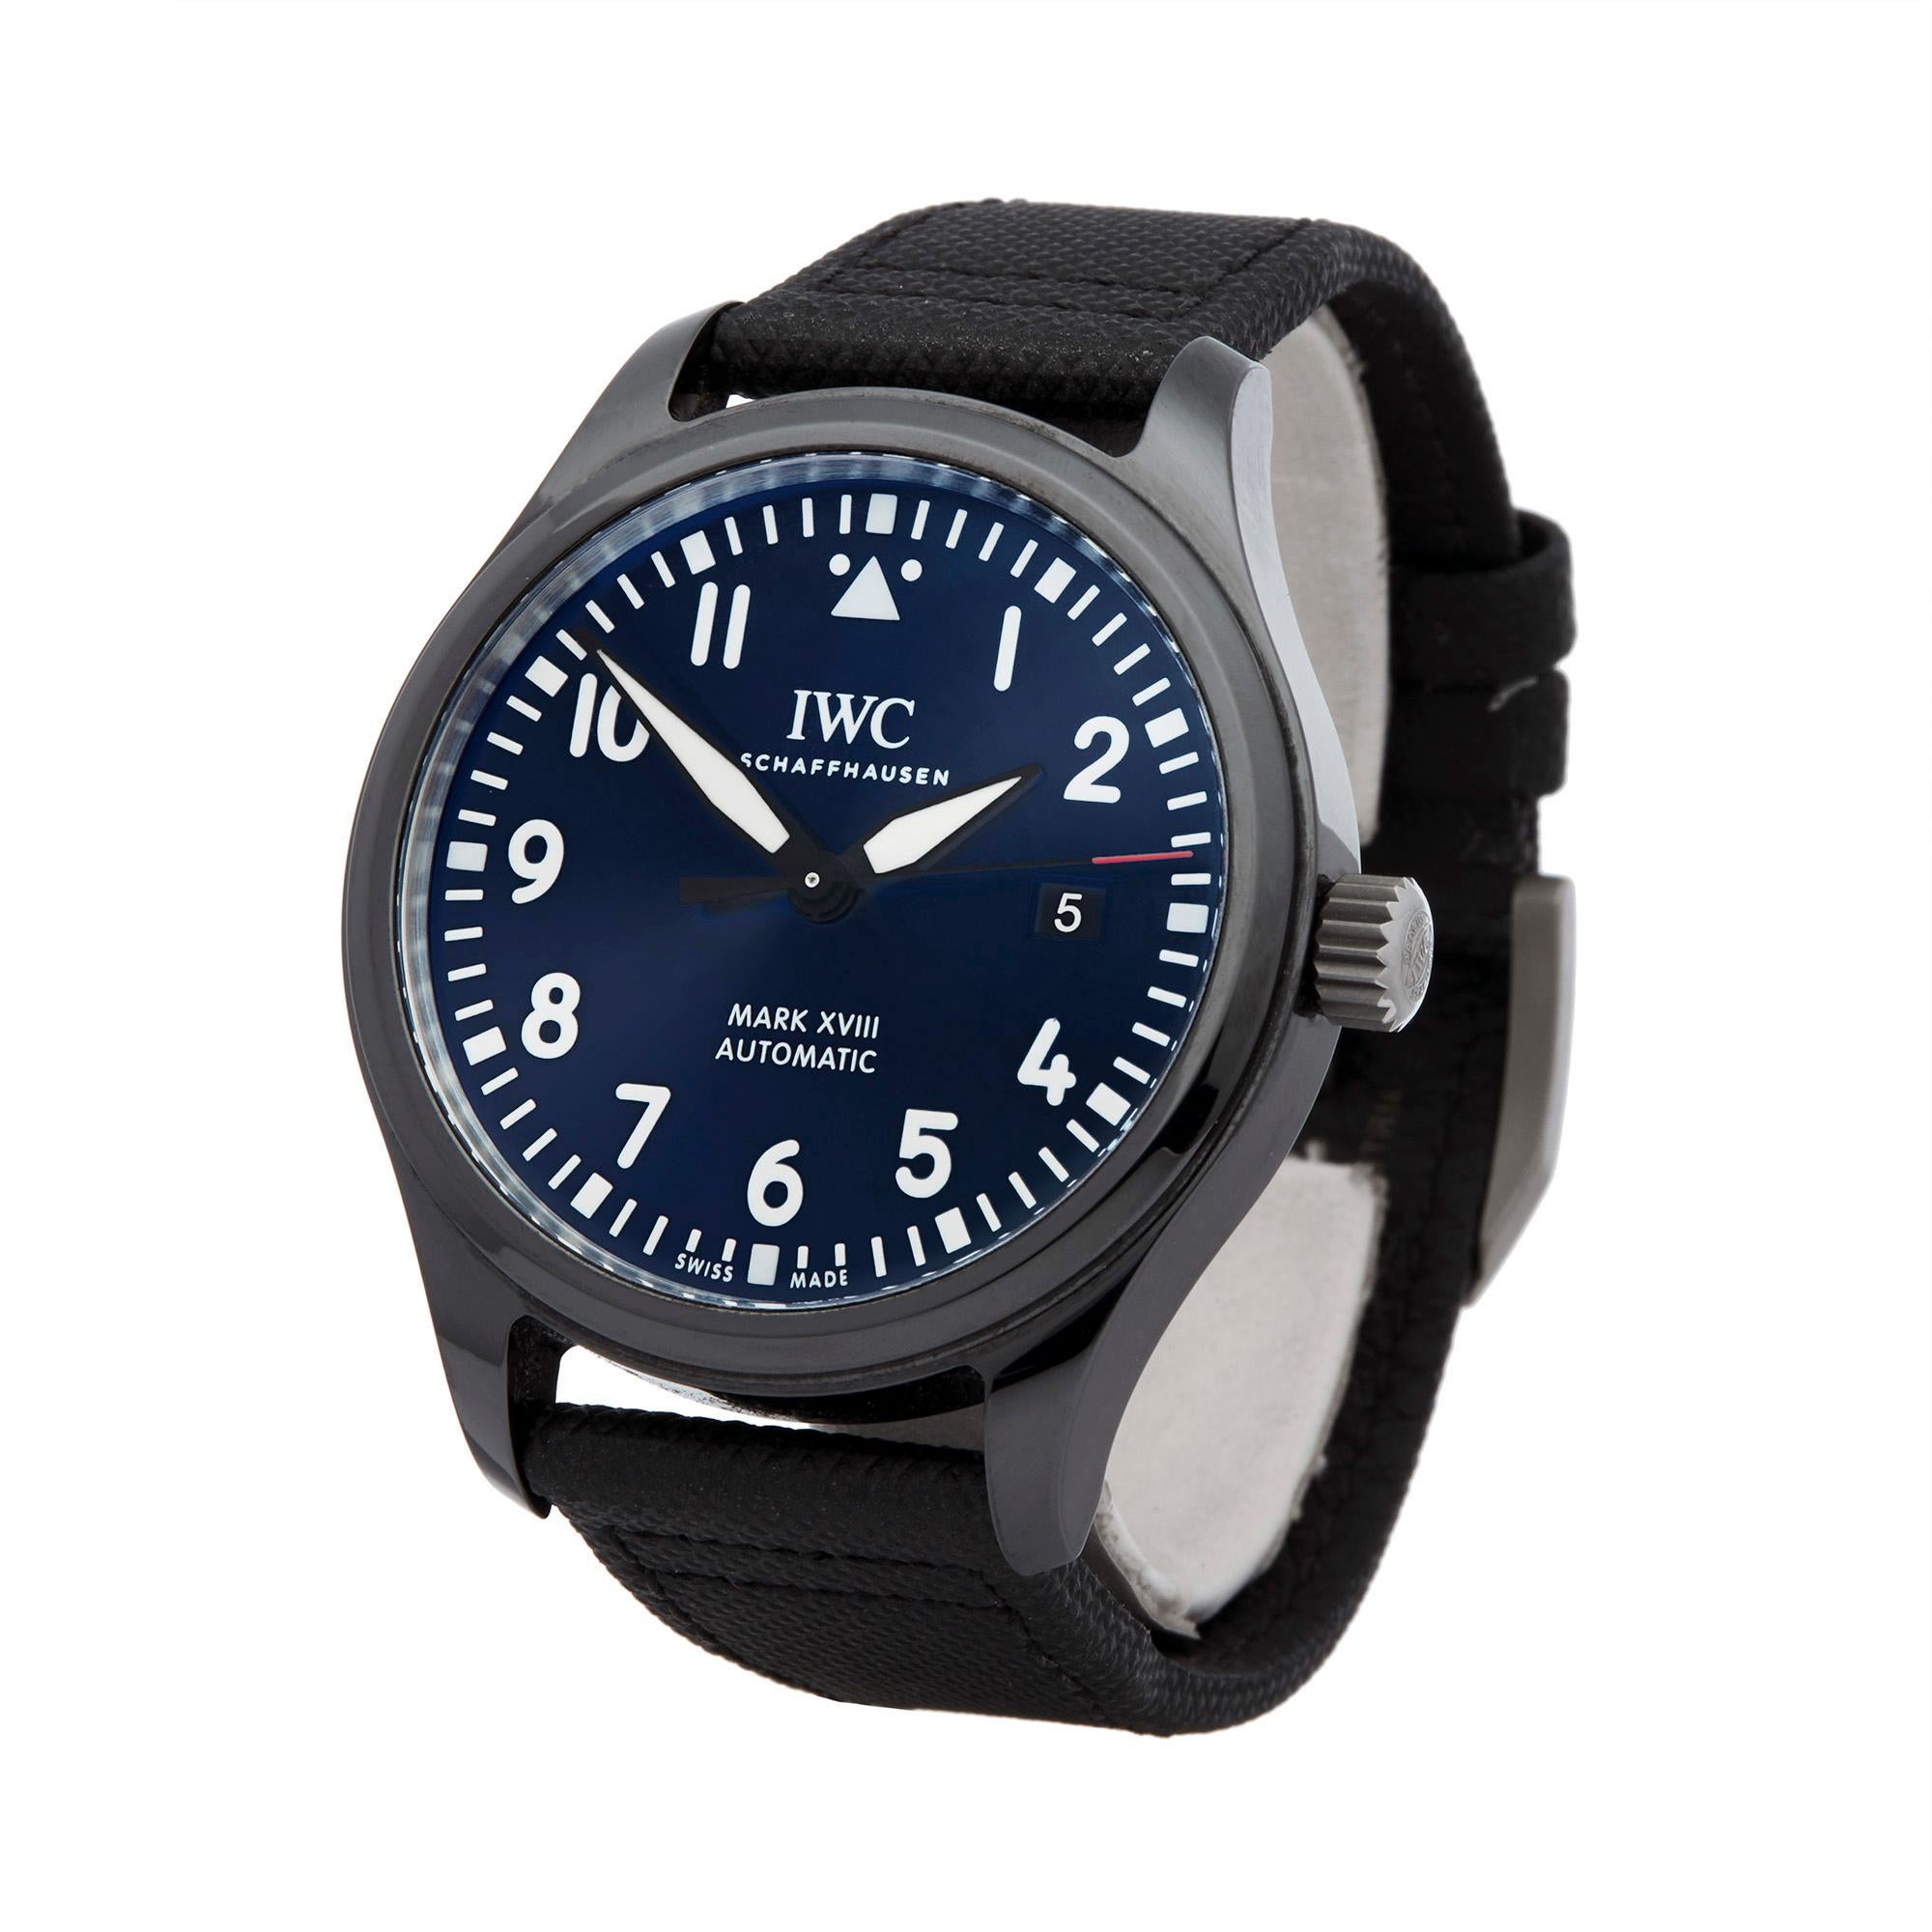 Ref: W5769
Manufacturer: IWC
Model: Mark XVIII
Model Ref: IW324703
Age: 12 September 2018
Gender: Mens
Complete With: Box, Manuals & Guarantee
Dial: Blue Arabic
Glass: Sapphire Crystal
Movement: Automatic
Water Resistance: To Manufacturers